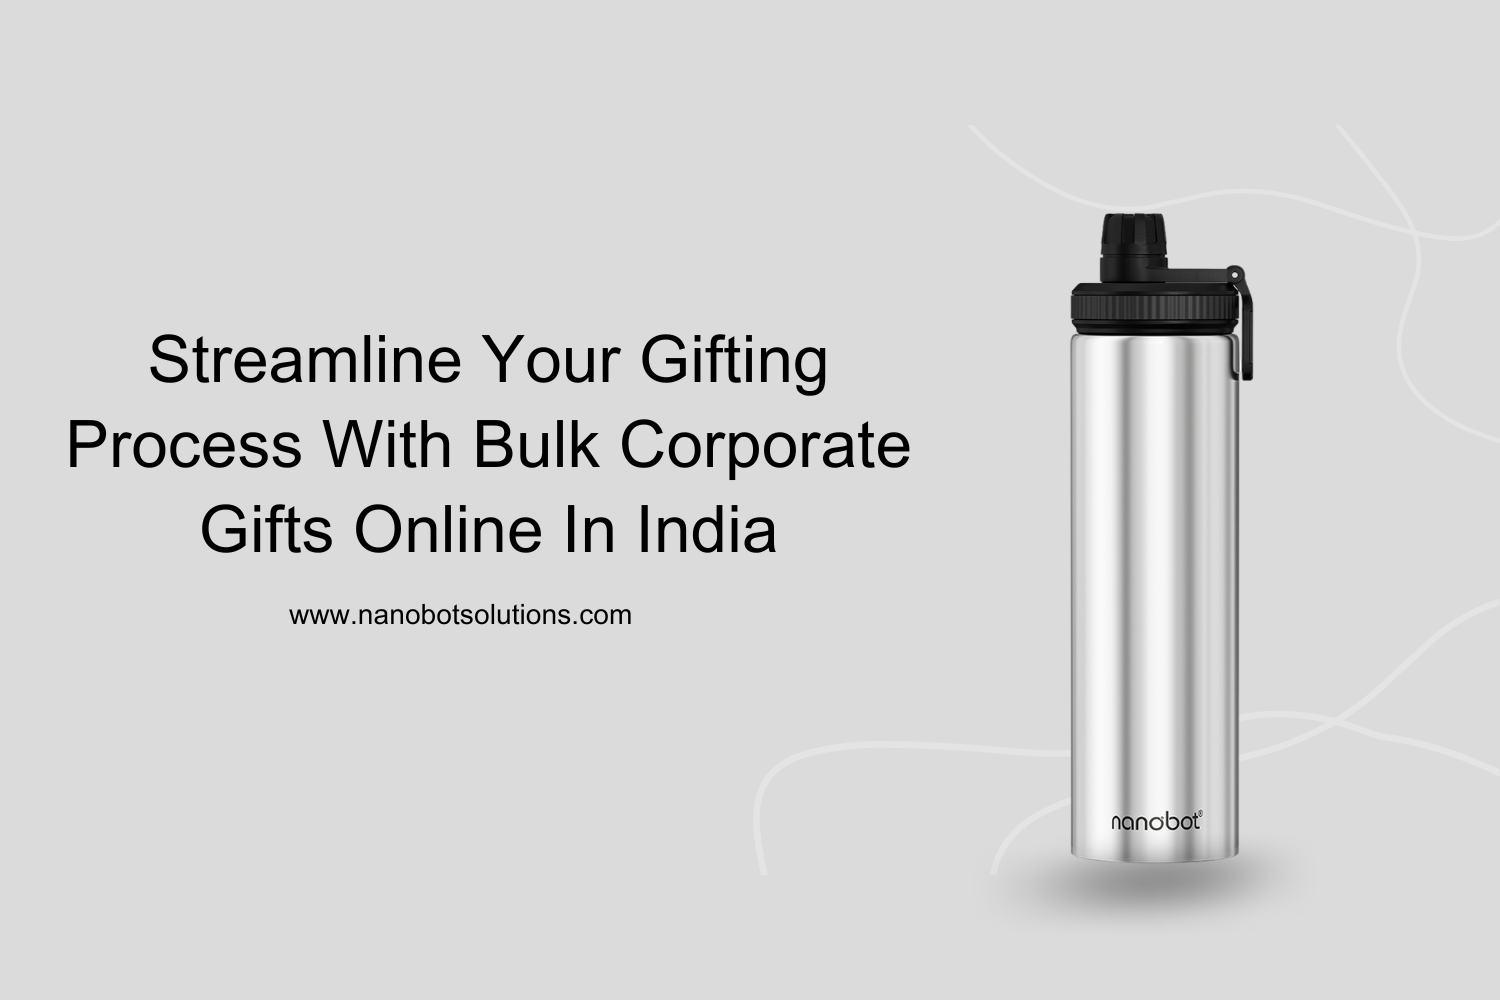 Streamline Your Gifting Process with Bulk Corporate Gifts Online in India -Nanobot